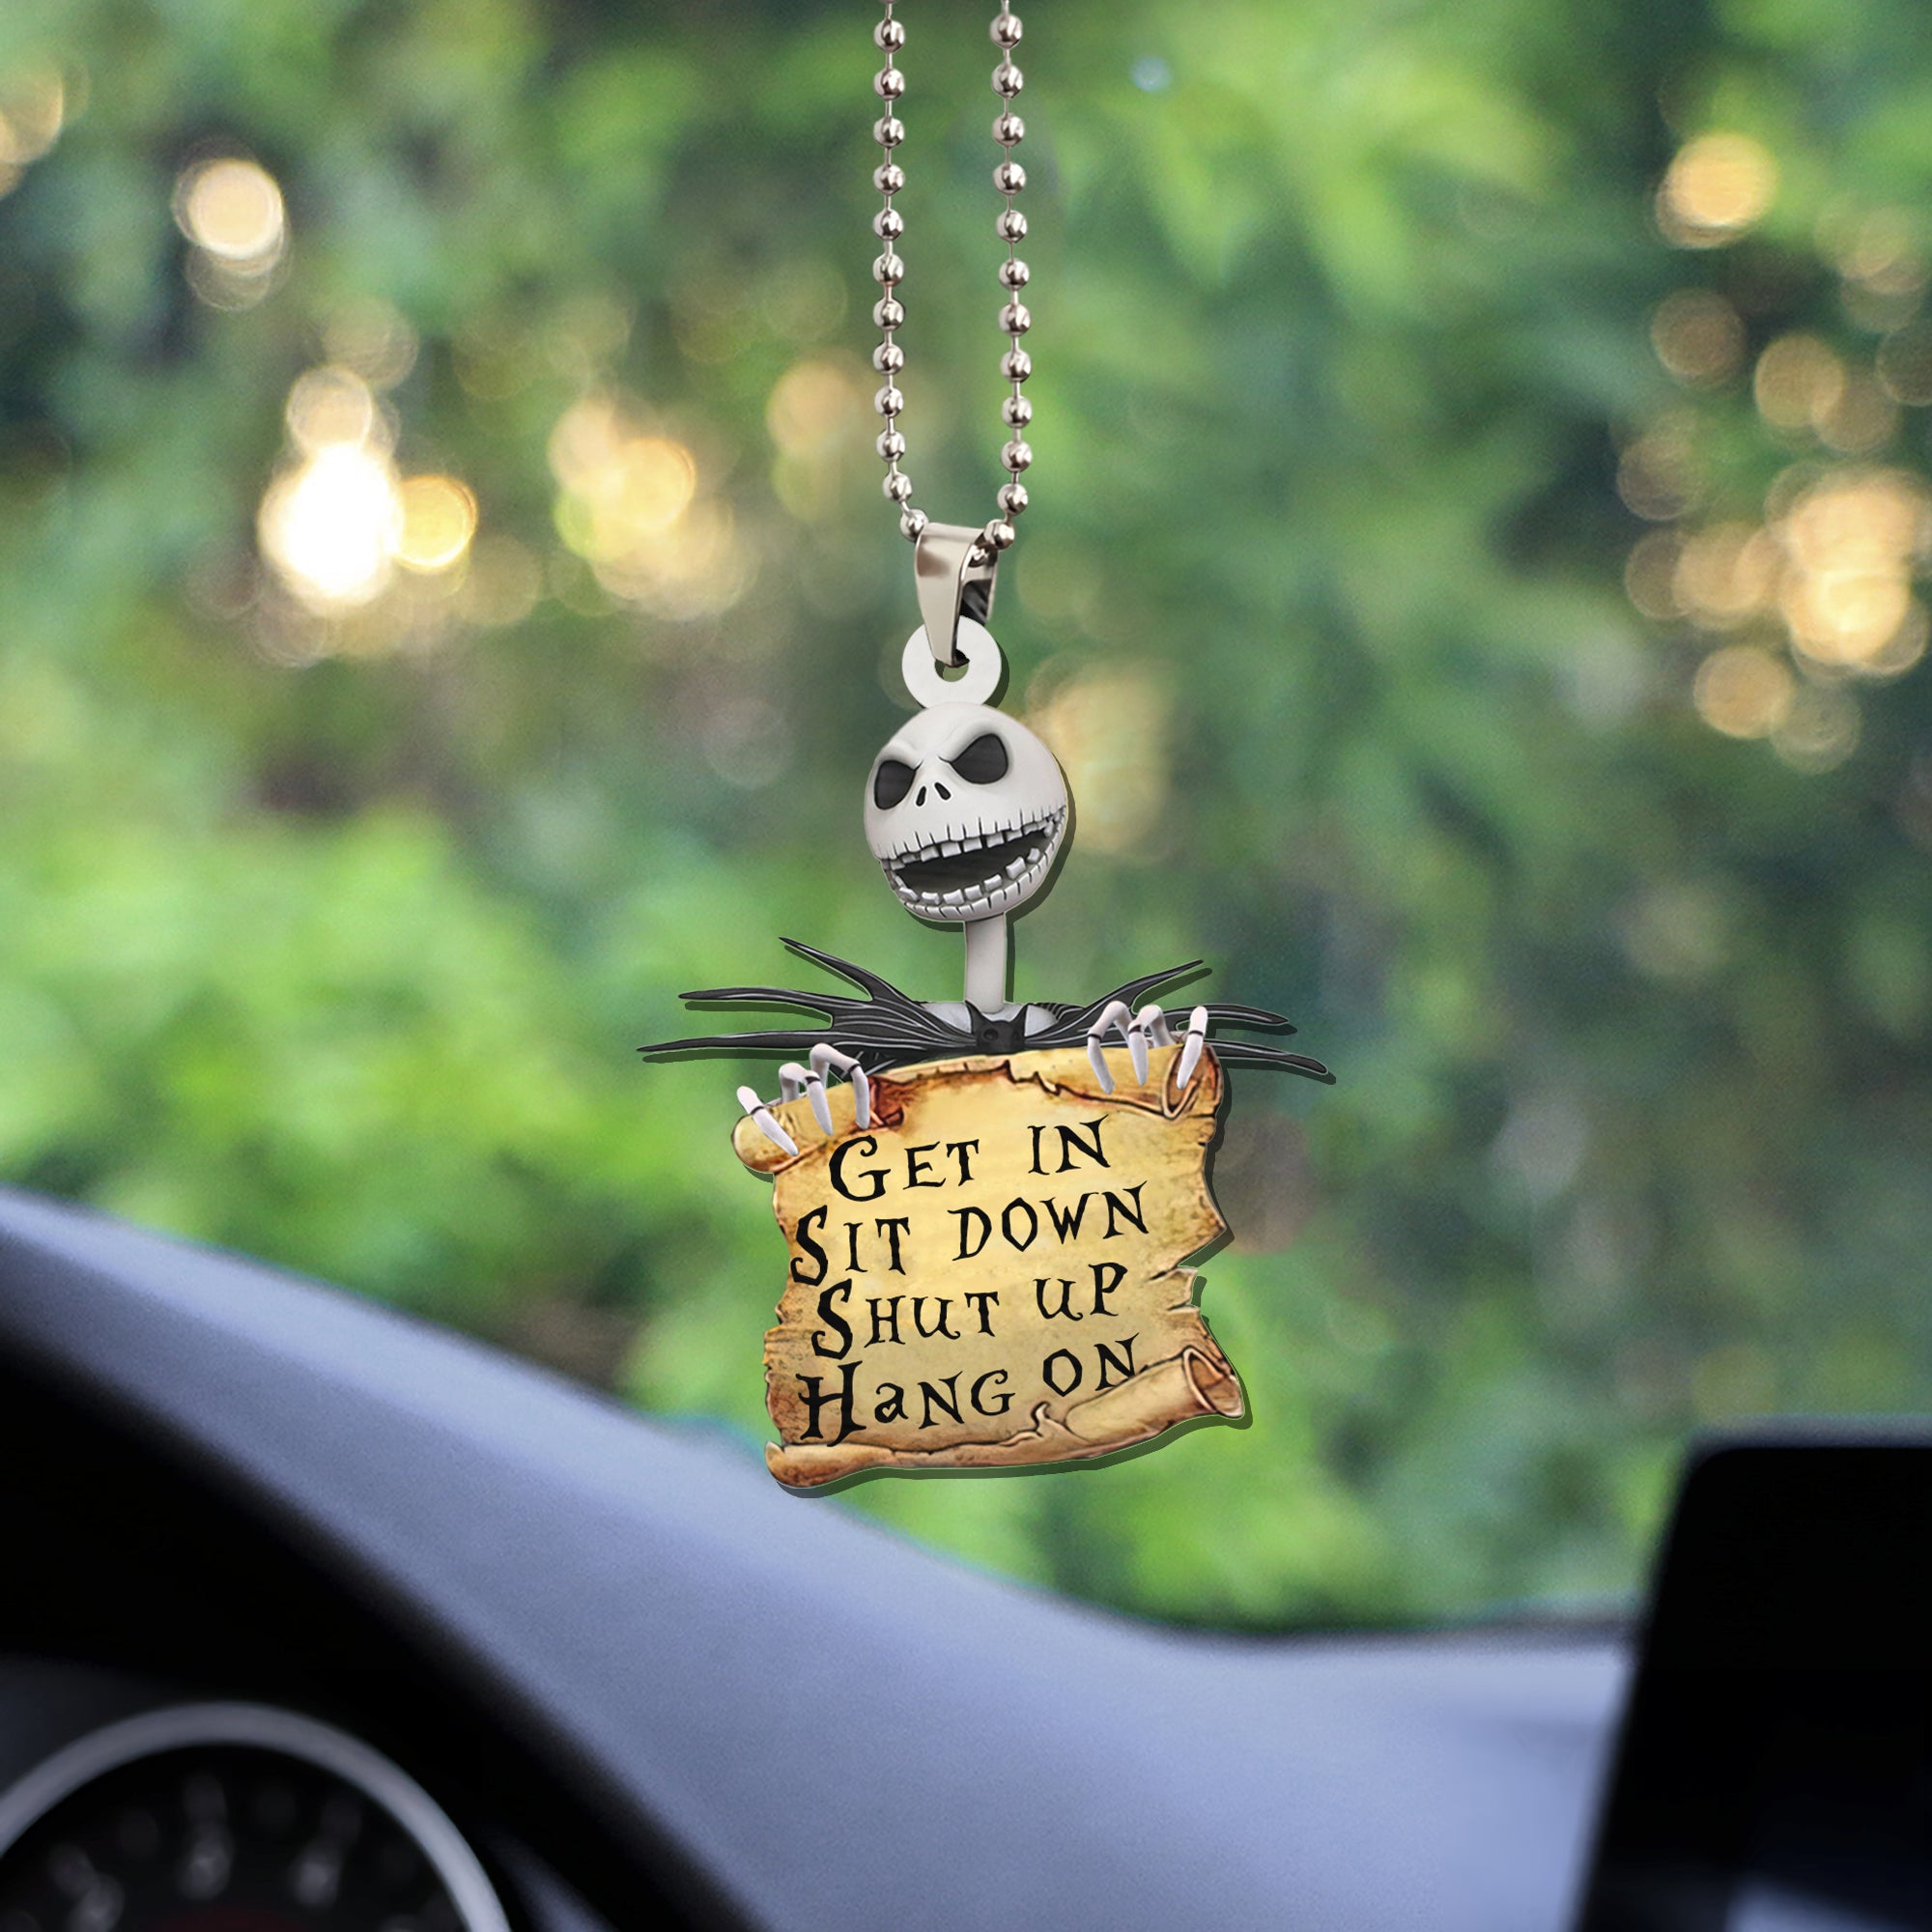 Get In Sit Down Shut Up Hold On Jack Nightmare Before Christmas Car Ornament Custom Car Accessories Decorations Nearkii